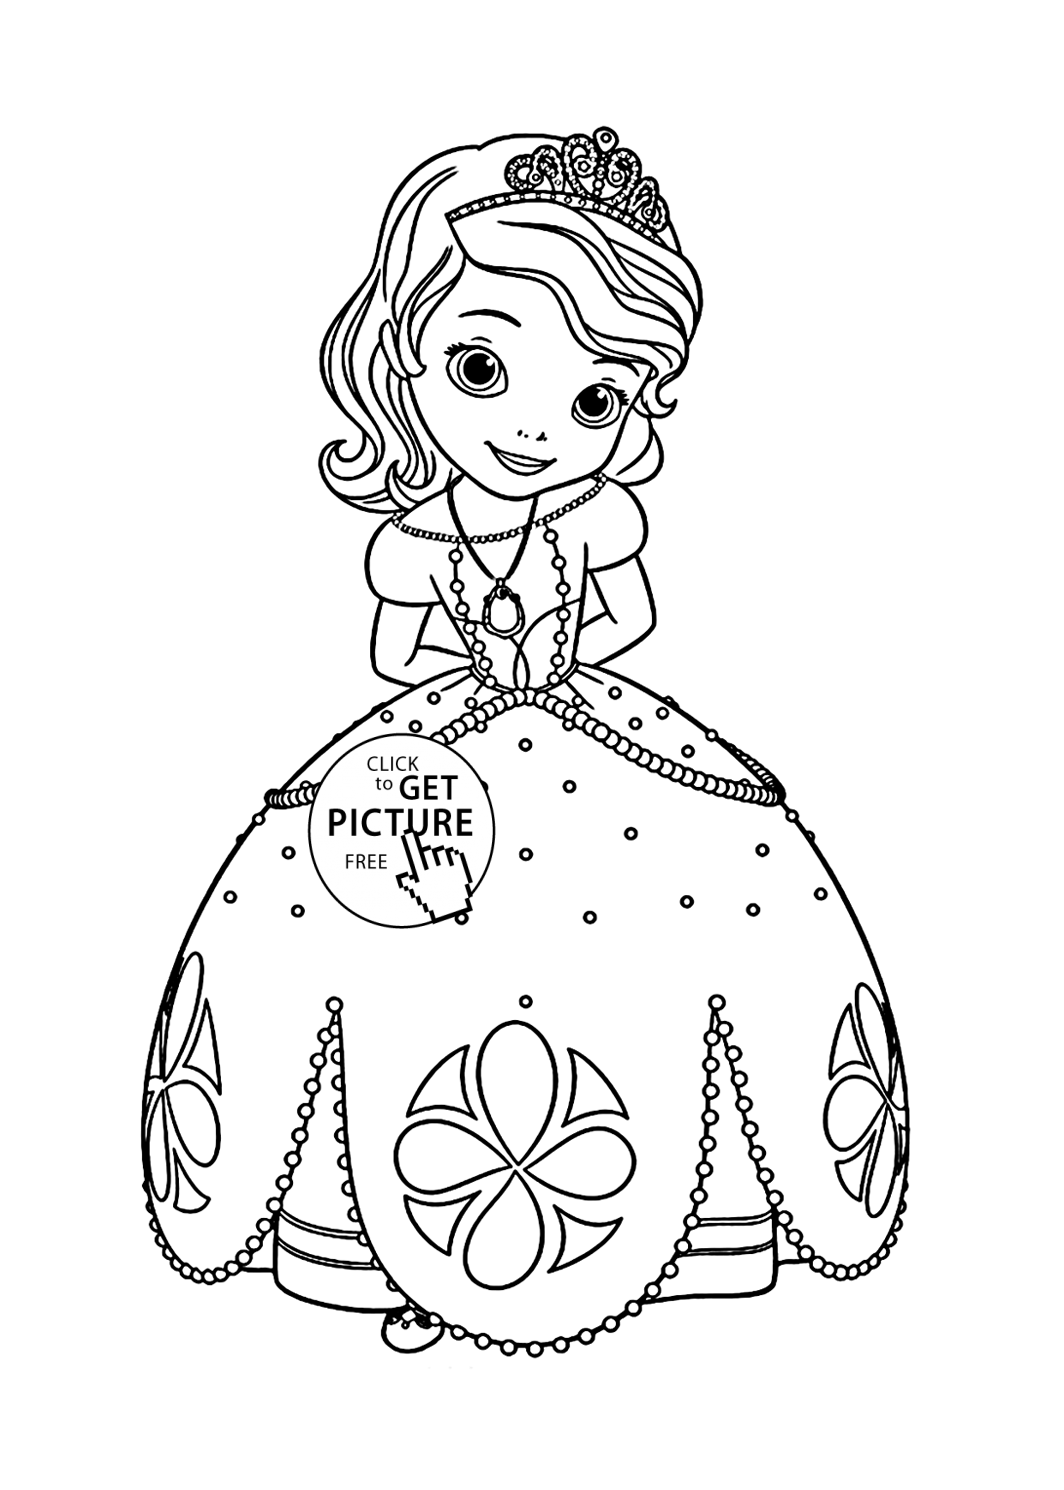 Princess Sofia coloring page for kids, disney for girls coloring ...